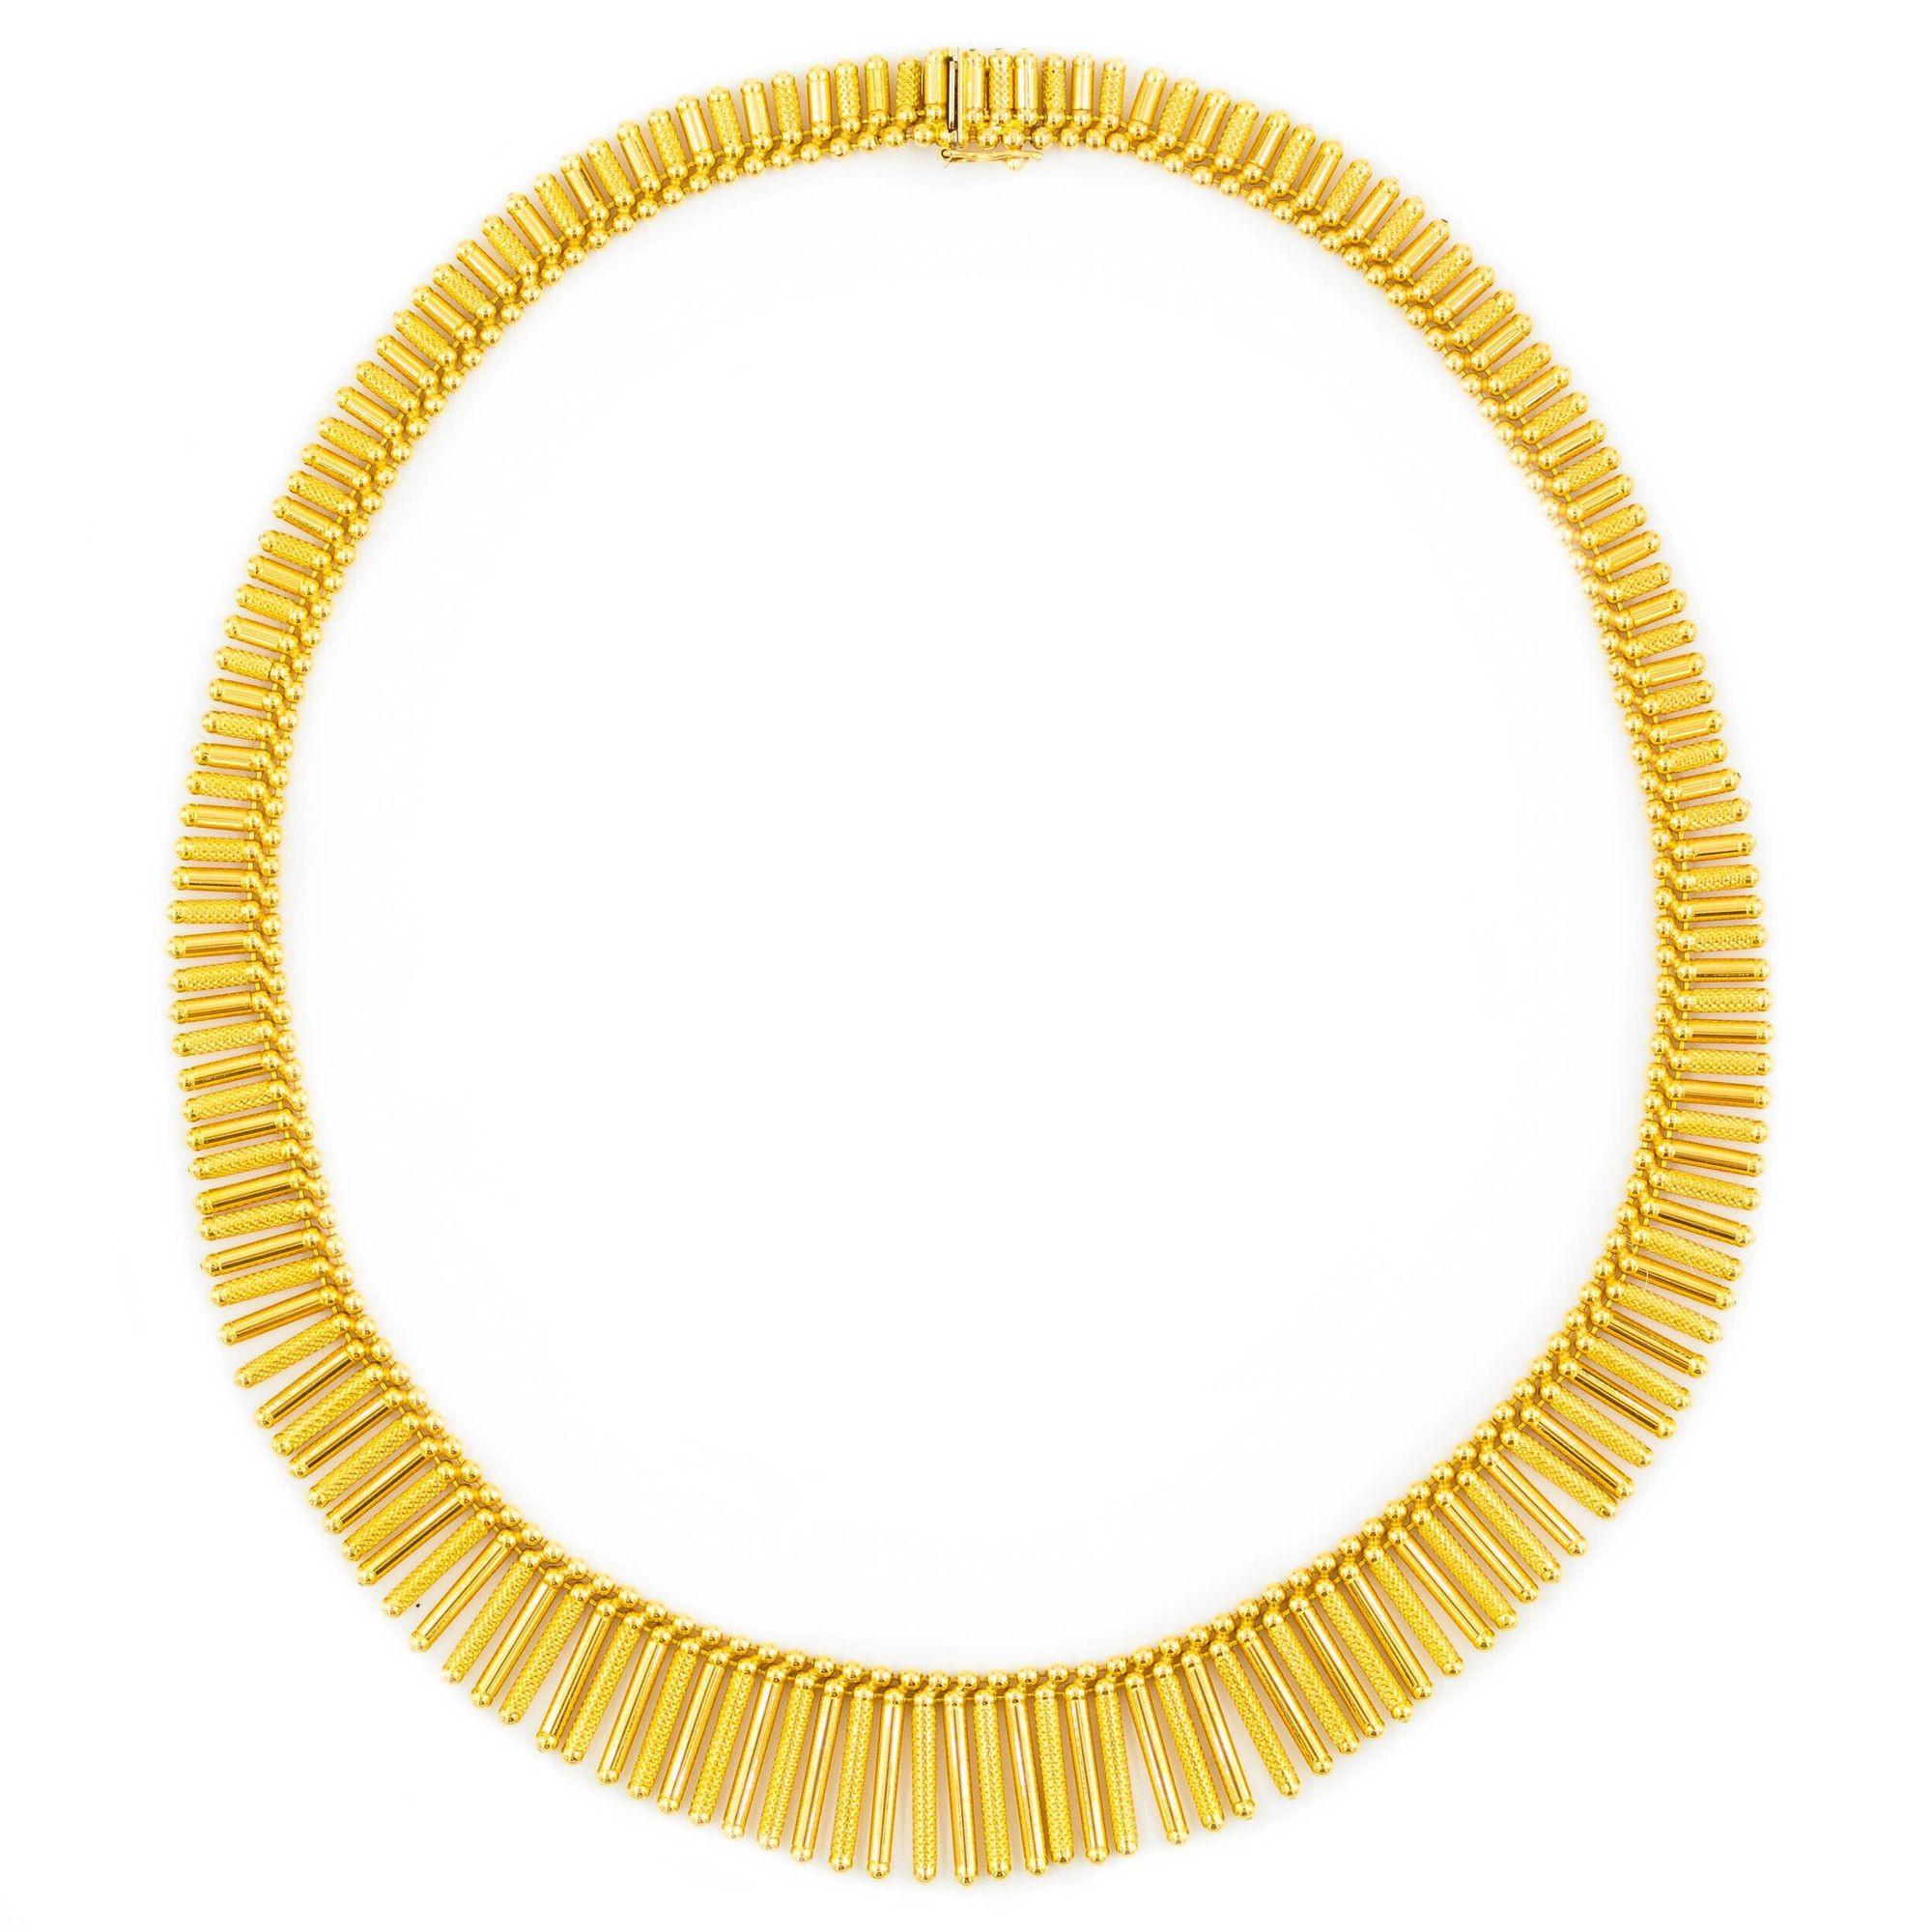 A wonderful slinky form by the well-known Italian jeweler Uno-A-Erre, it features a series of alternating textured and high-polish tubes with spherical ends hung in a fringe that graduates from 3/4